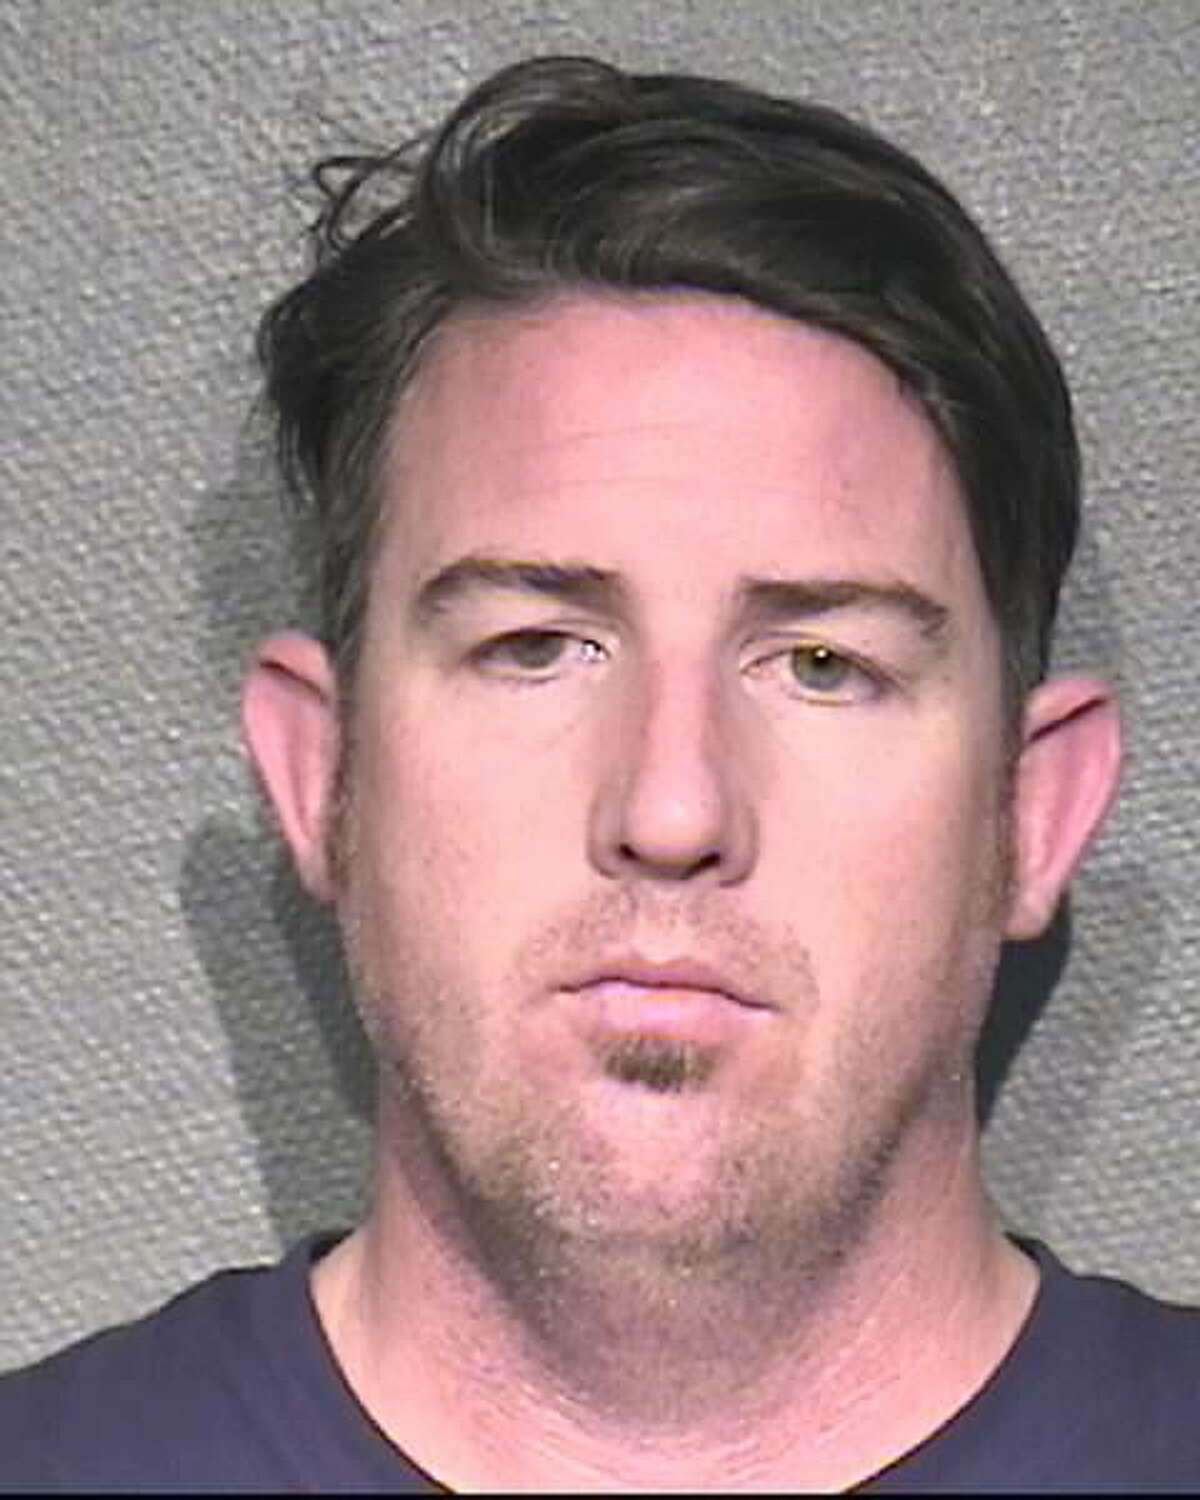 Jason Michael Archibald, a HFD captain, has been charged with assaulting a family member.